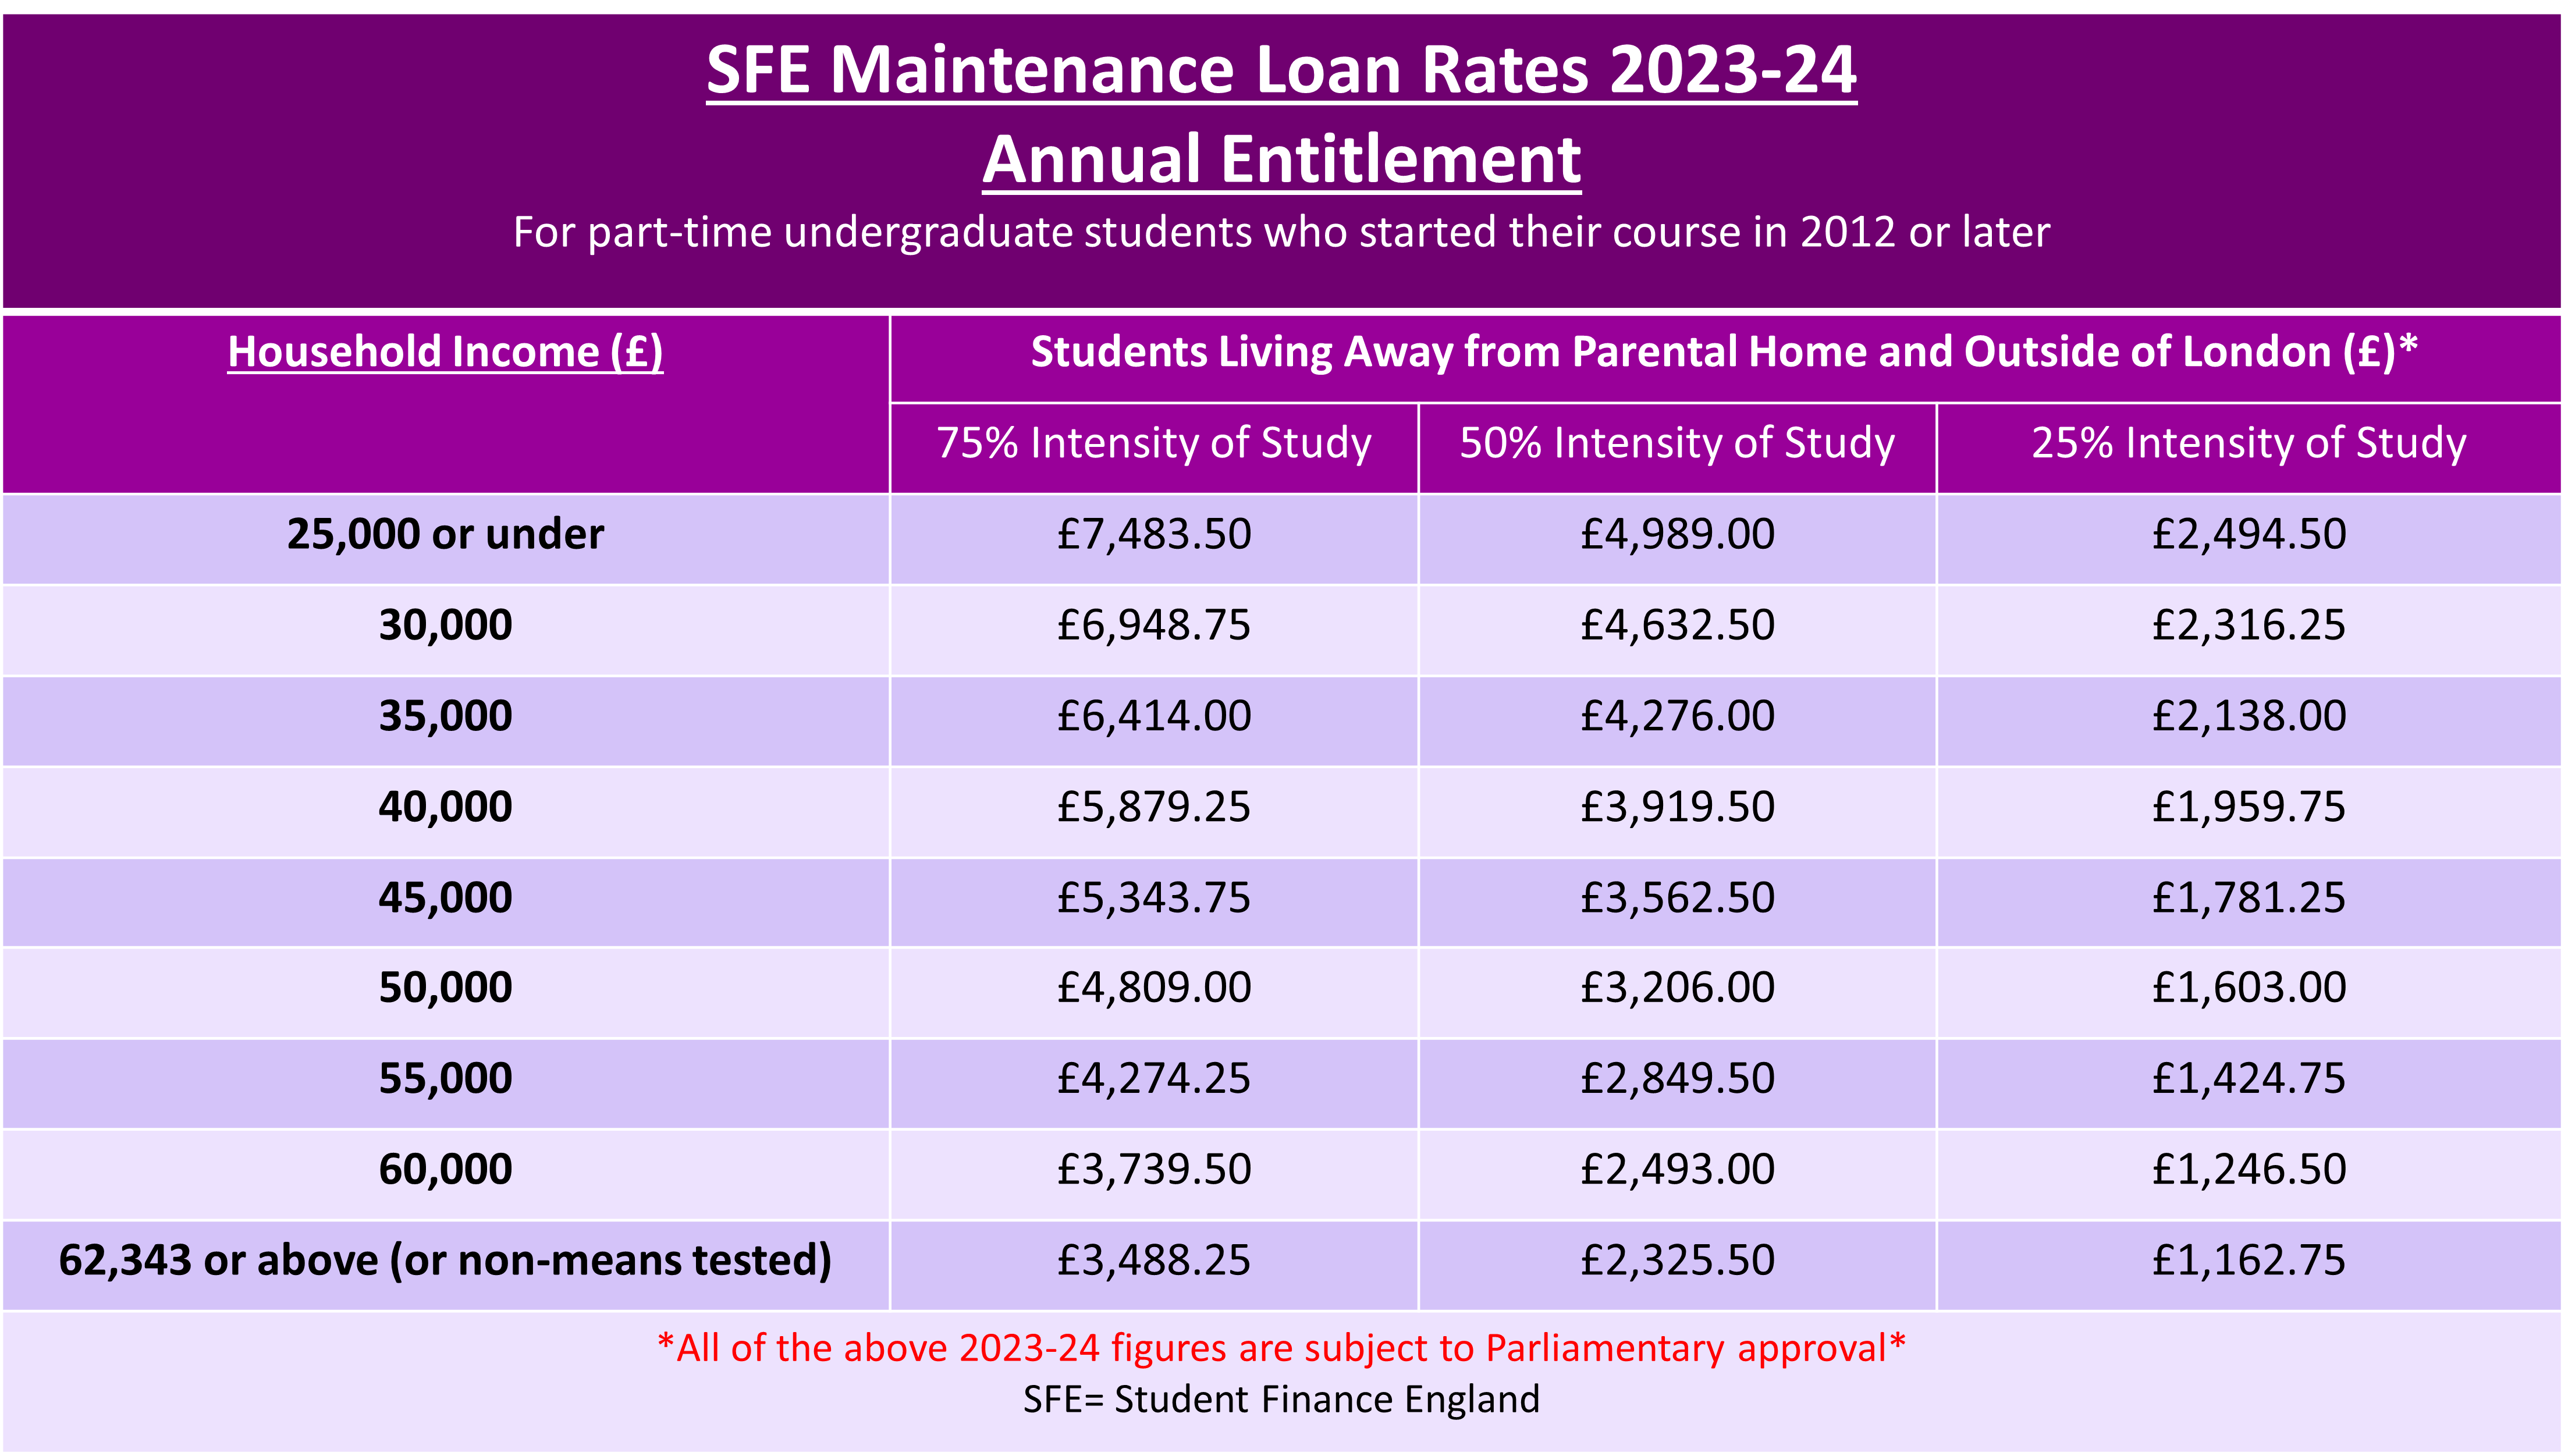 A table to show 2023-24 maintenance loan rates for part-time students studying at various intensities and living away from parental home but outside of London. Subject to parliamentary approval.